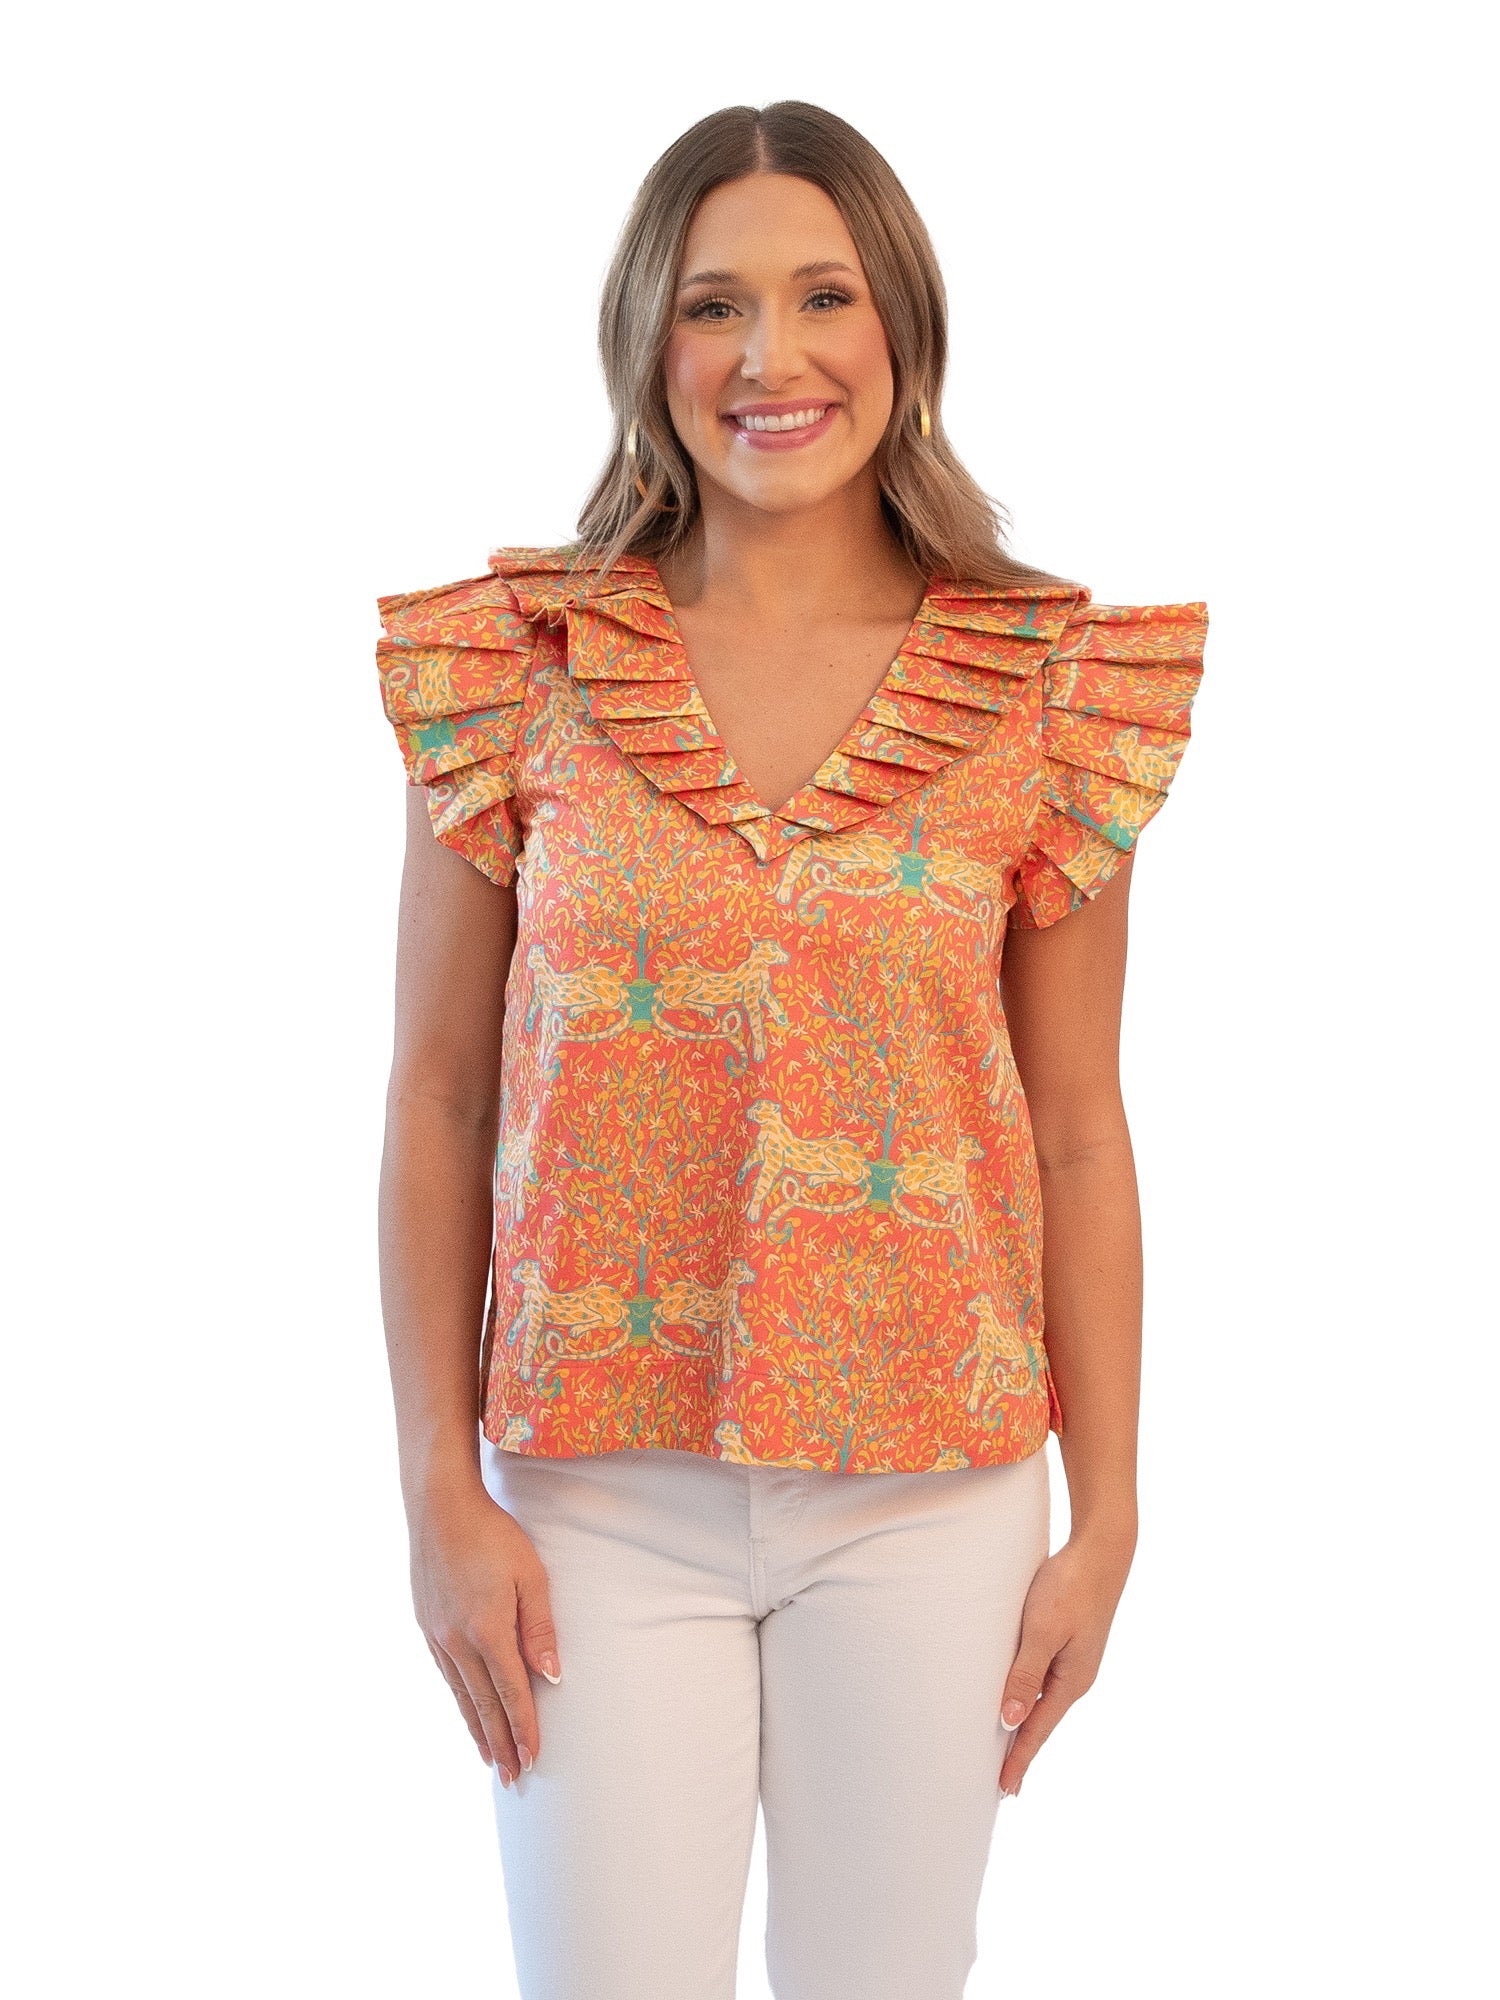 Cloister Amelia Top by Emily McCarthy